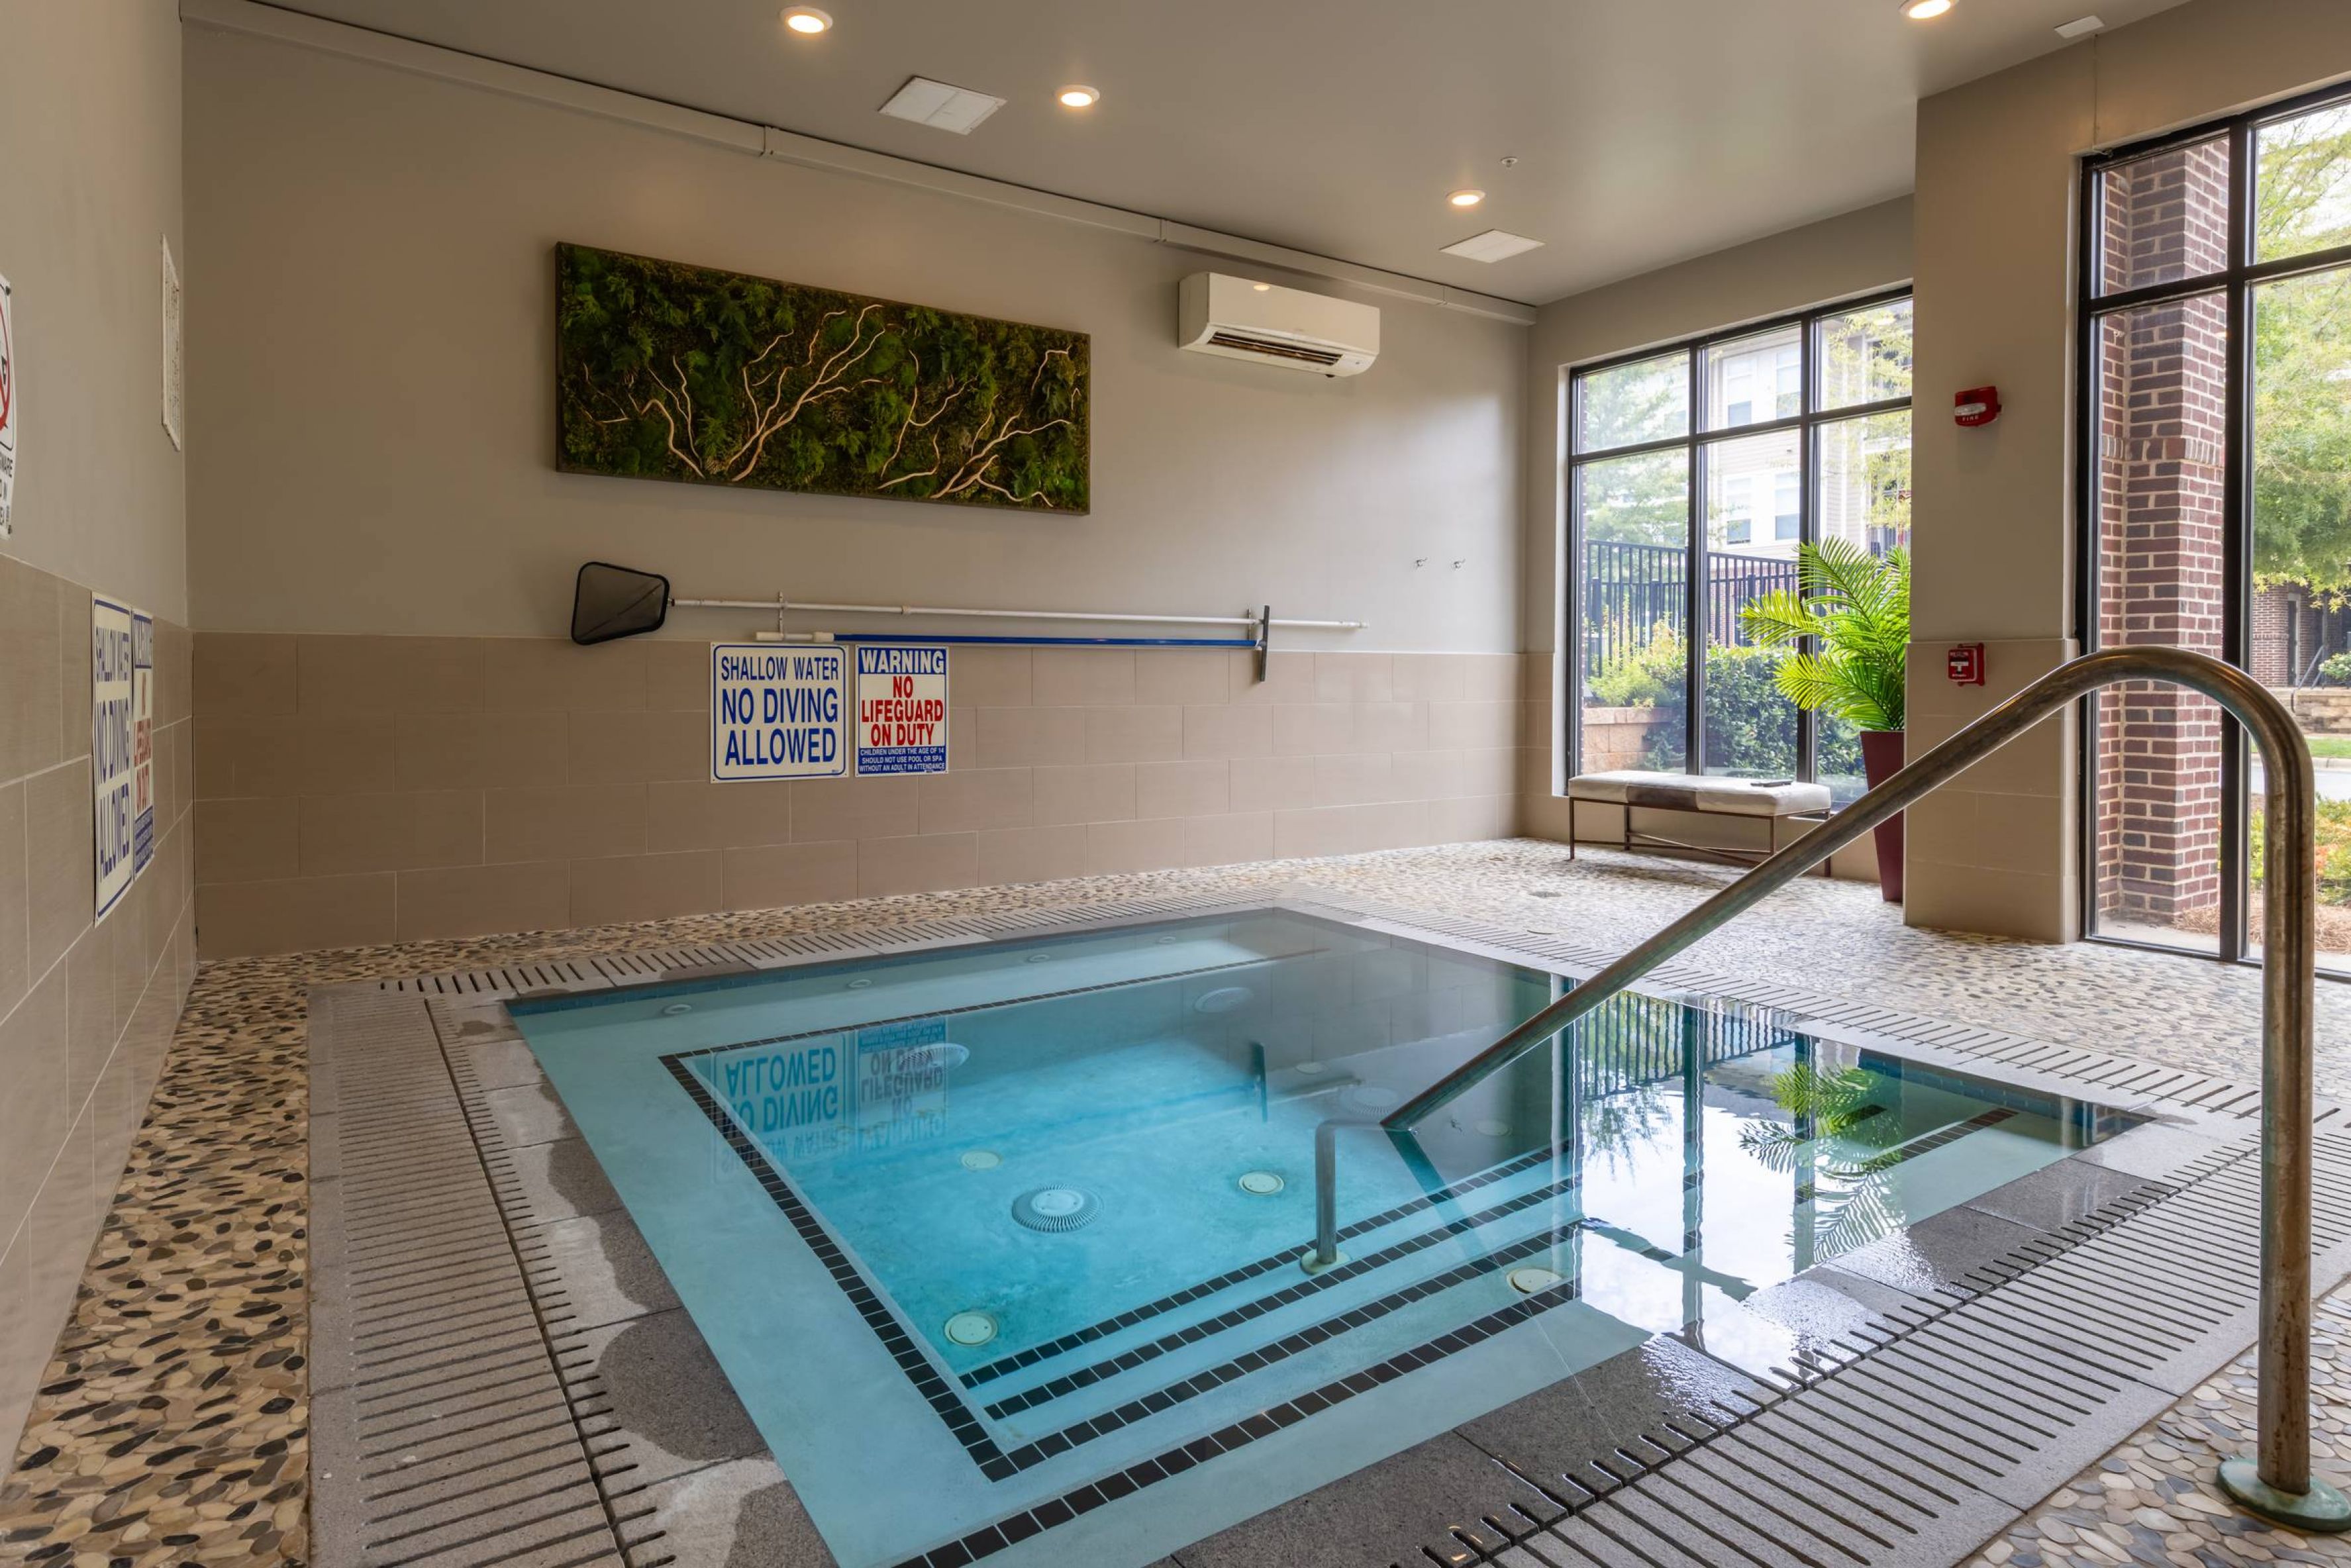 Apartments at Holly Crest luxury indoor hot tub amenity